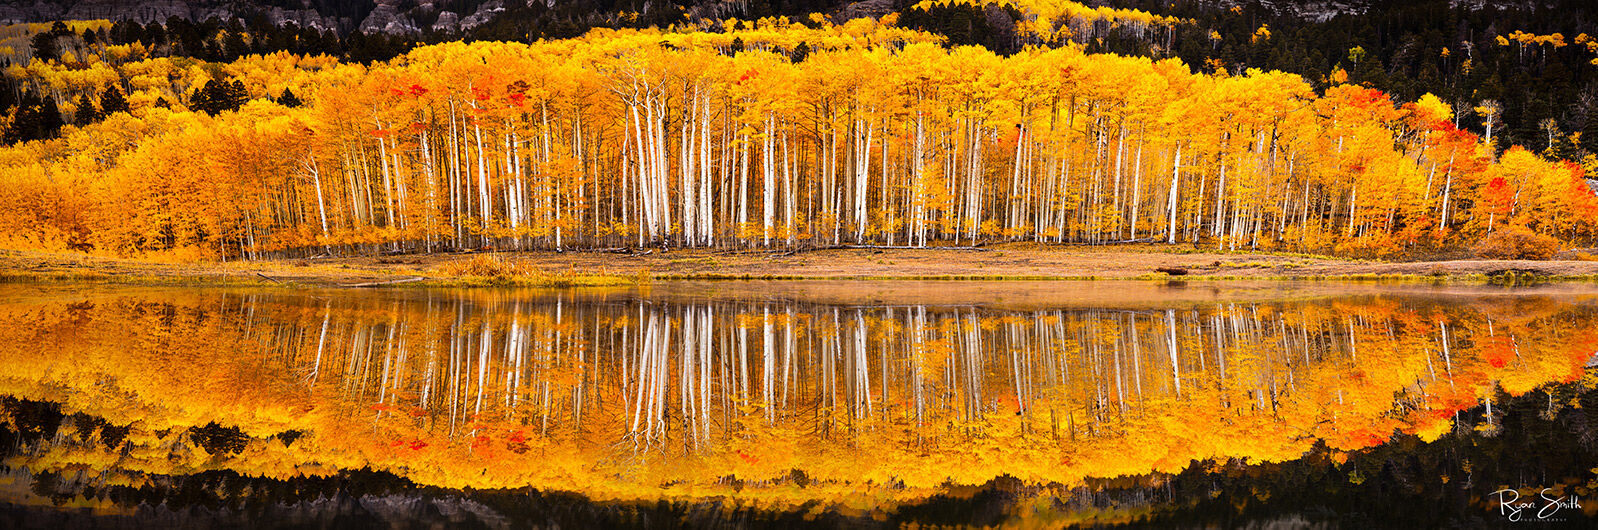 A grove of aspen trees with tall, thin trunks and bright yellow leaves is perfectly reflected on a still pond in this ultrawide panoramic image.